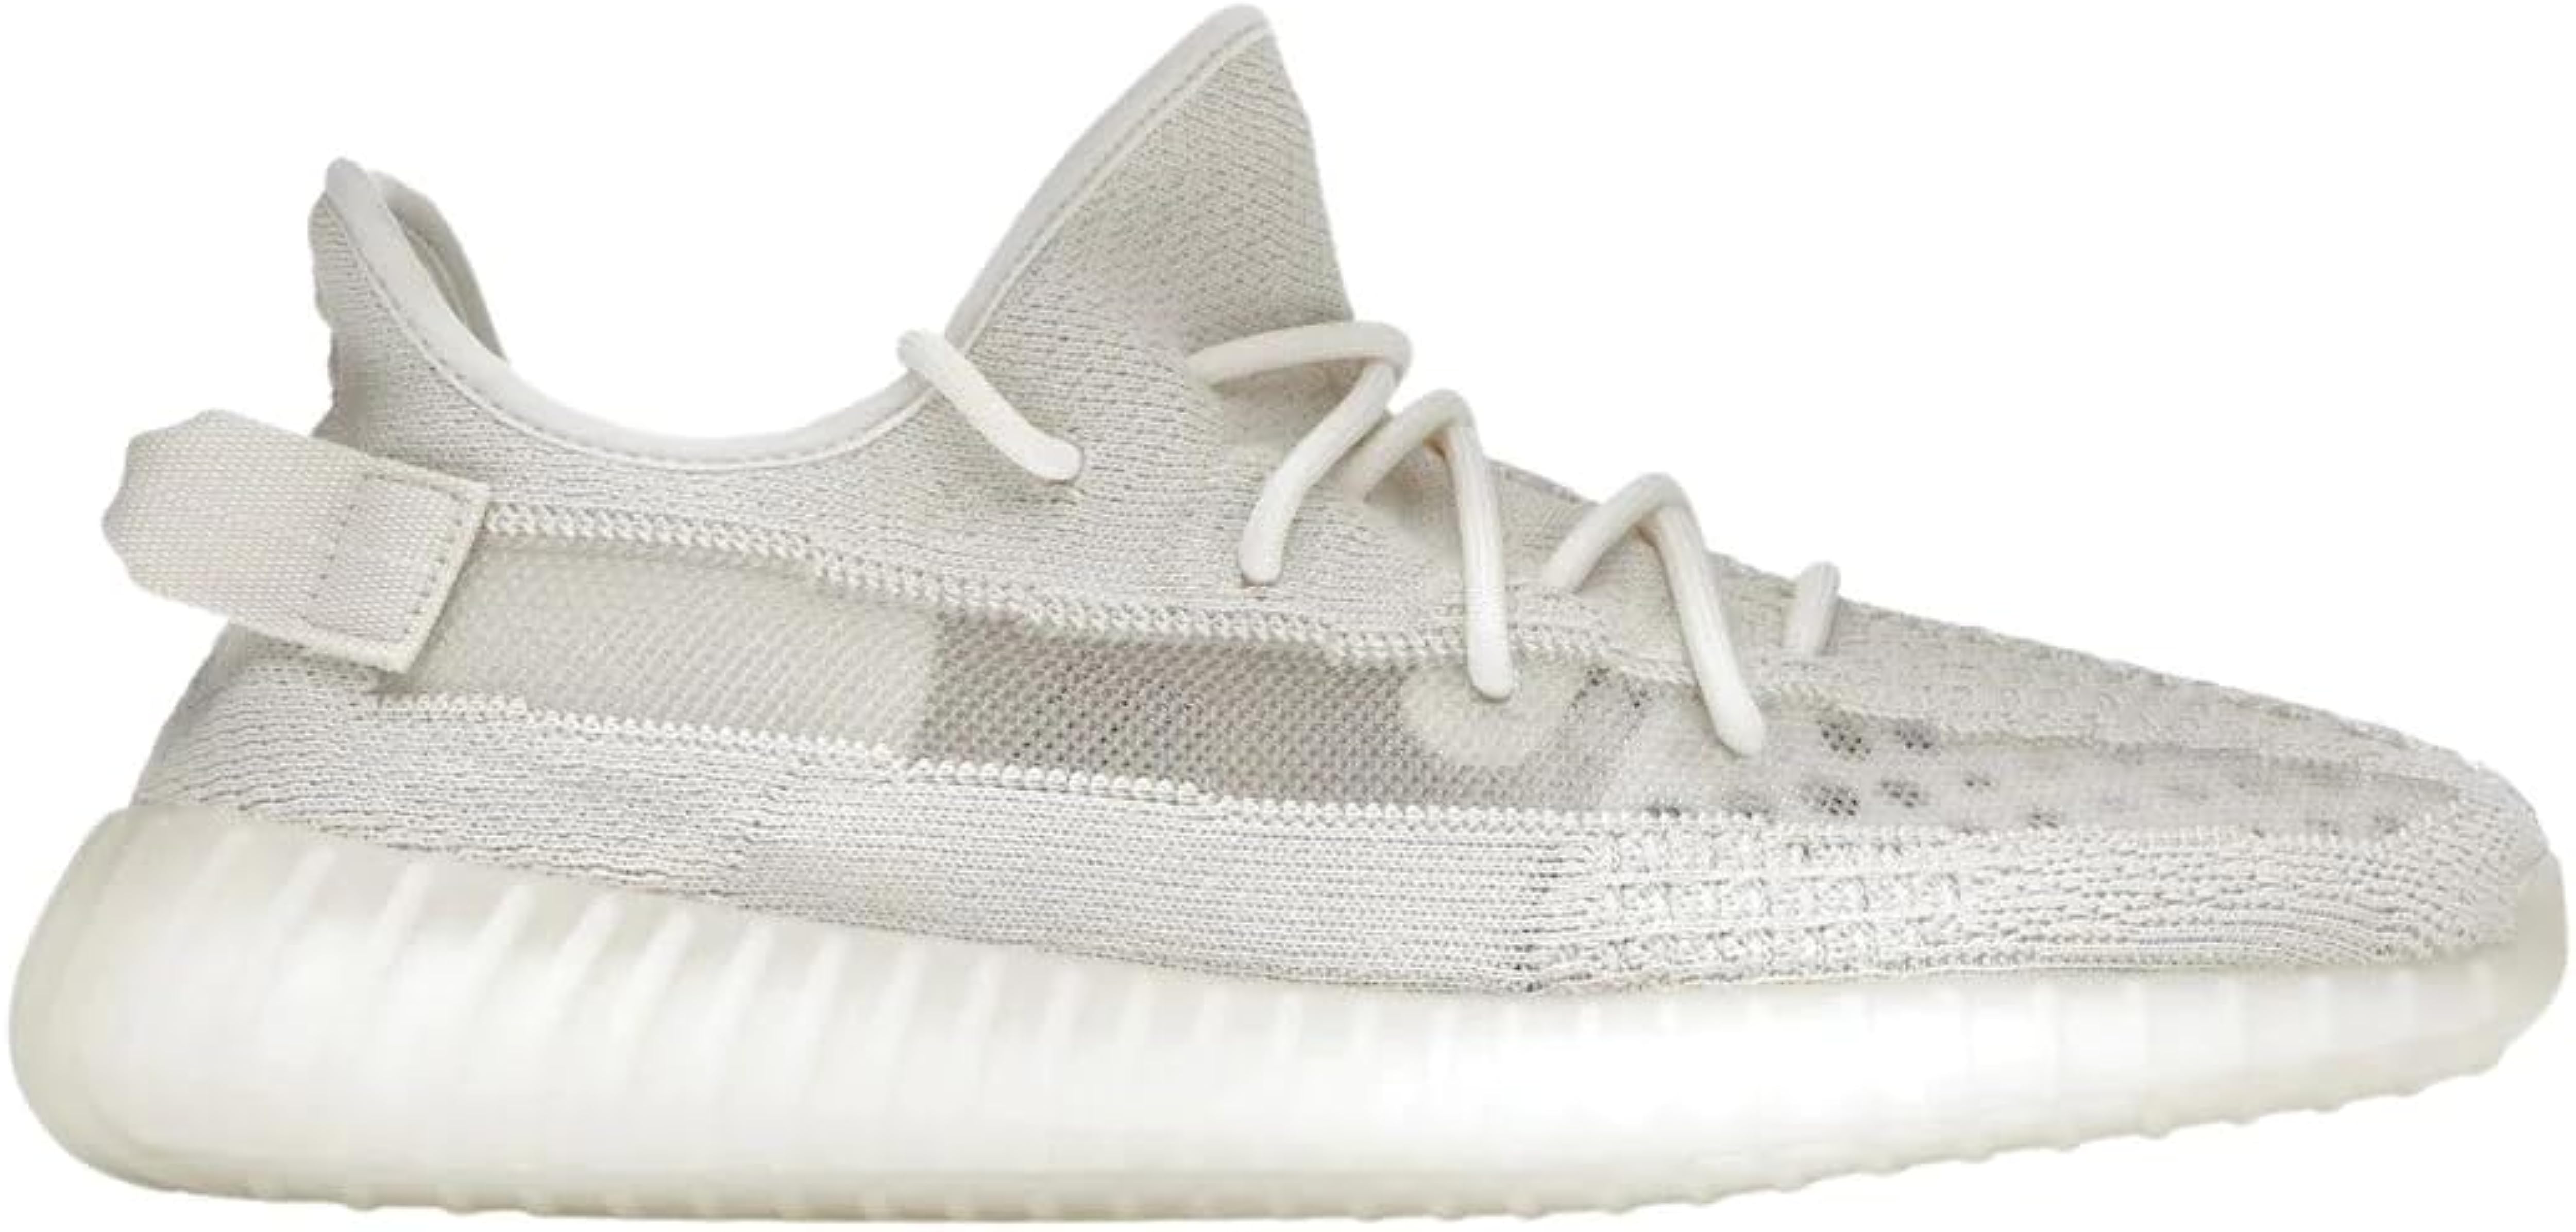 adidas Mens Yeezy Boost 350 V2 Shoes